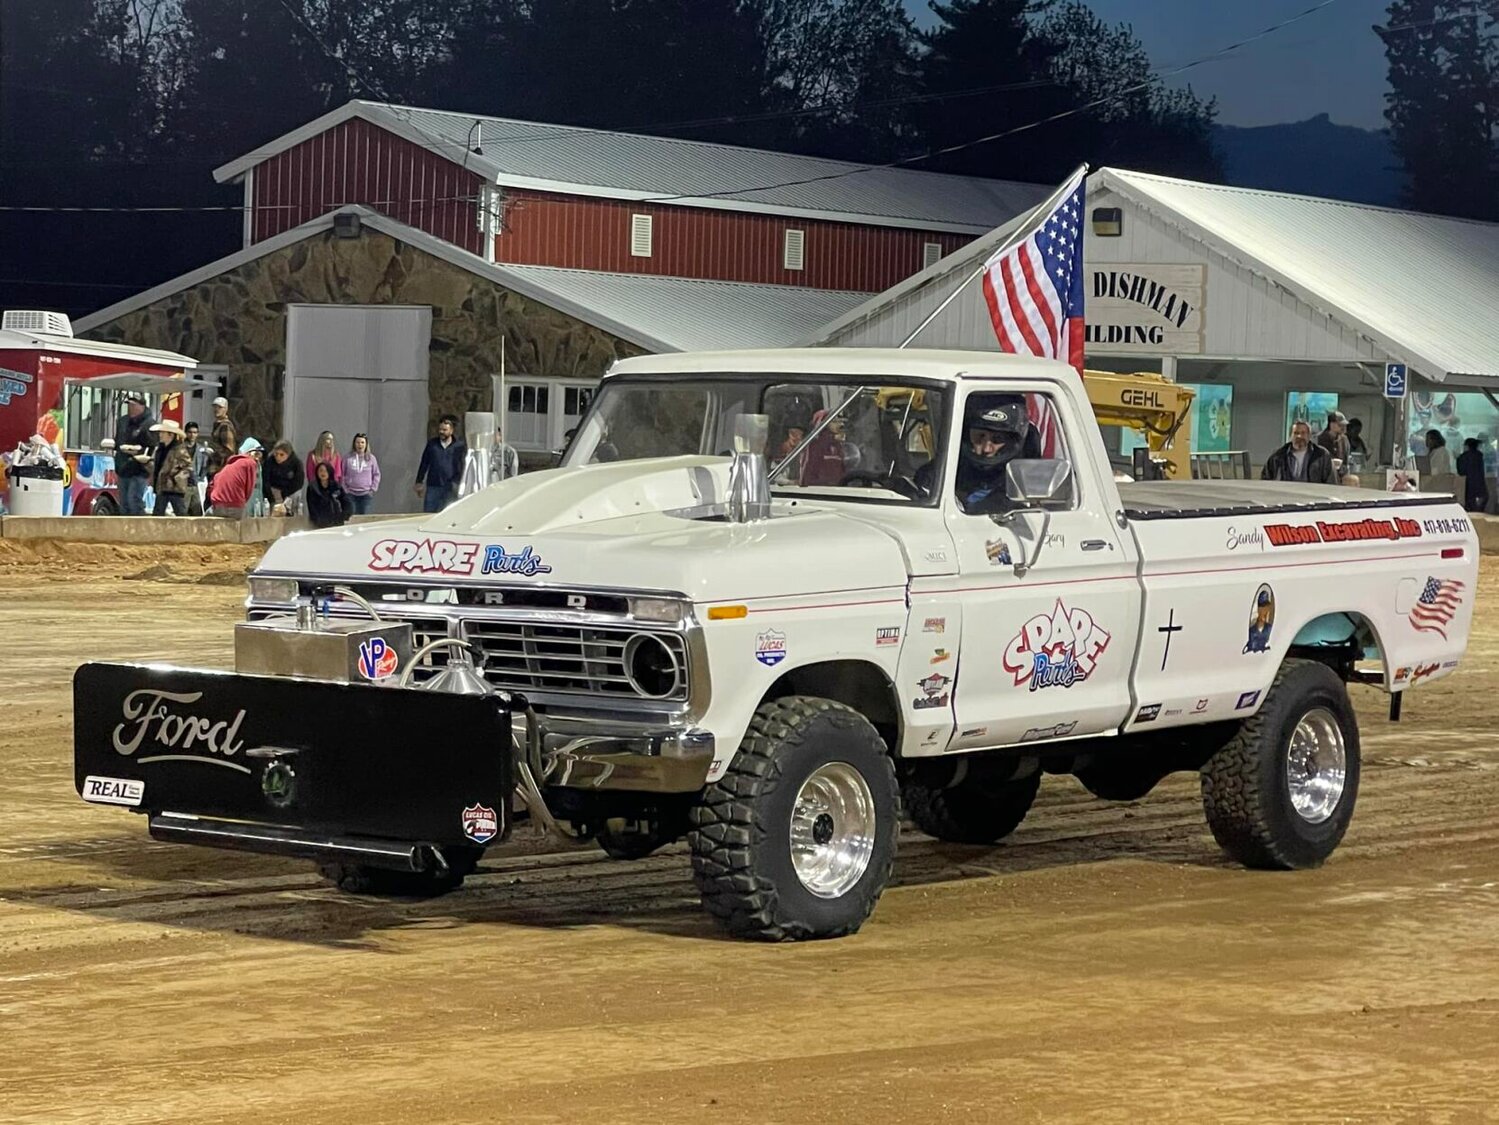 Pictured is Gary Don Letterman, of Niangua, who has pulled this truck for over 50 years at the Webster County Fairgrounds.